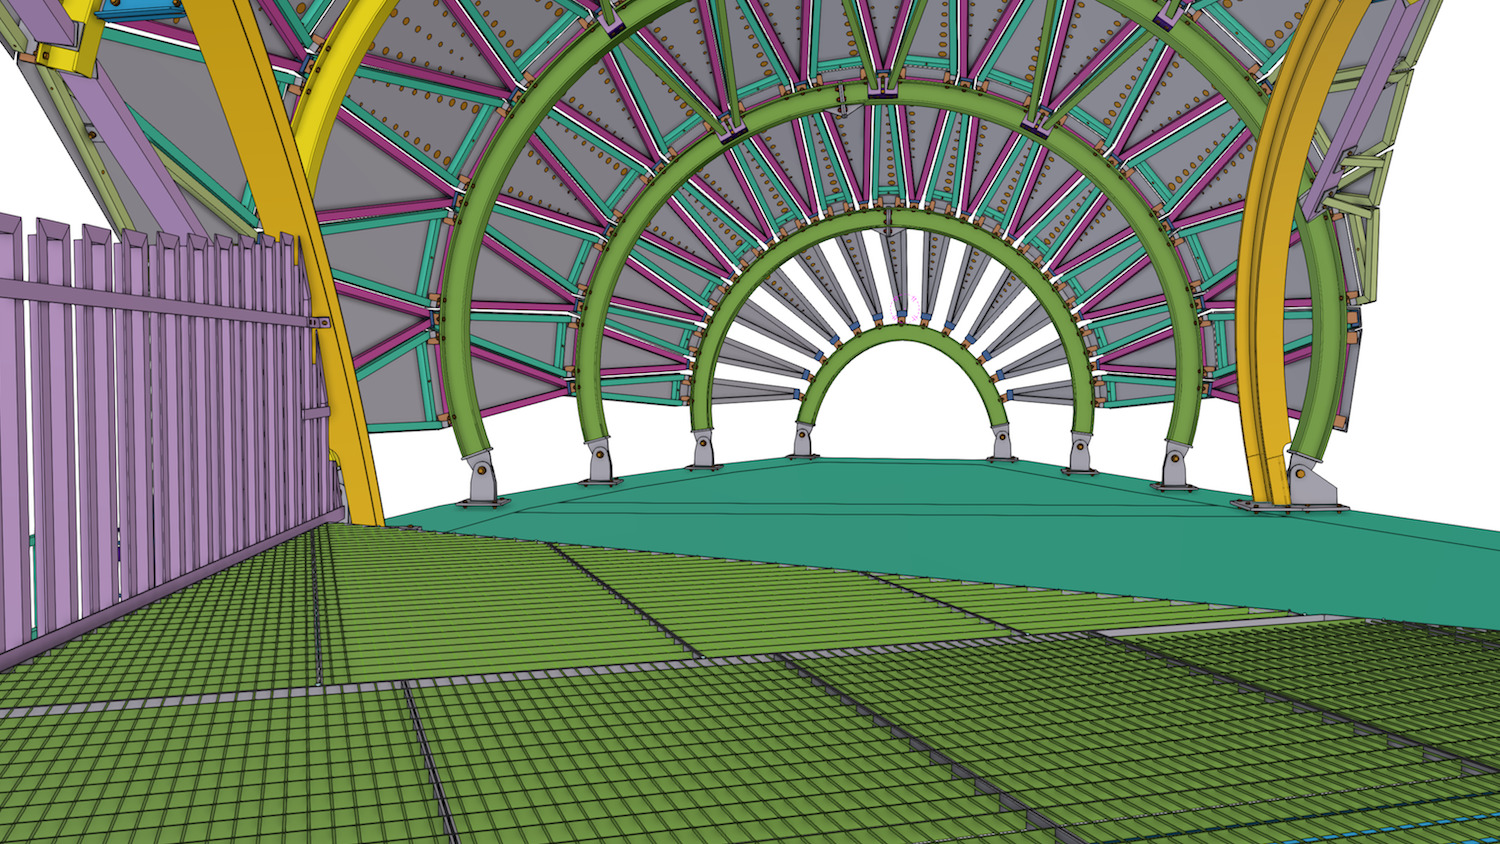 Hydro Ness interior in screen grab from Tekla Structures